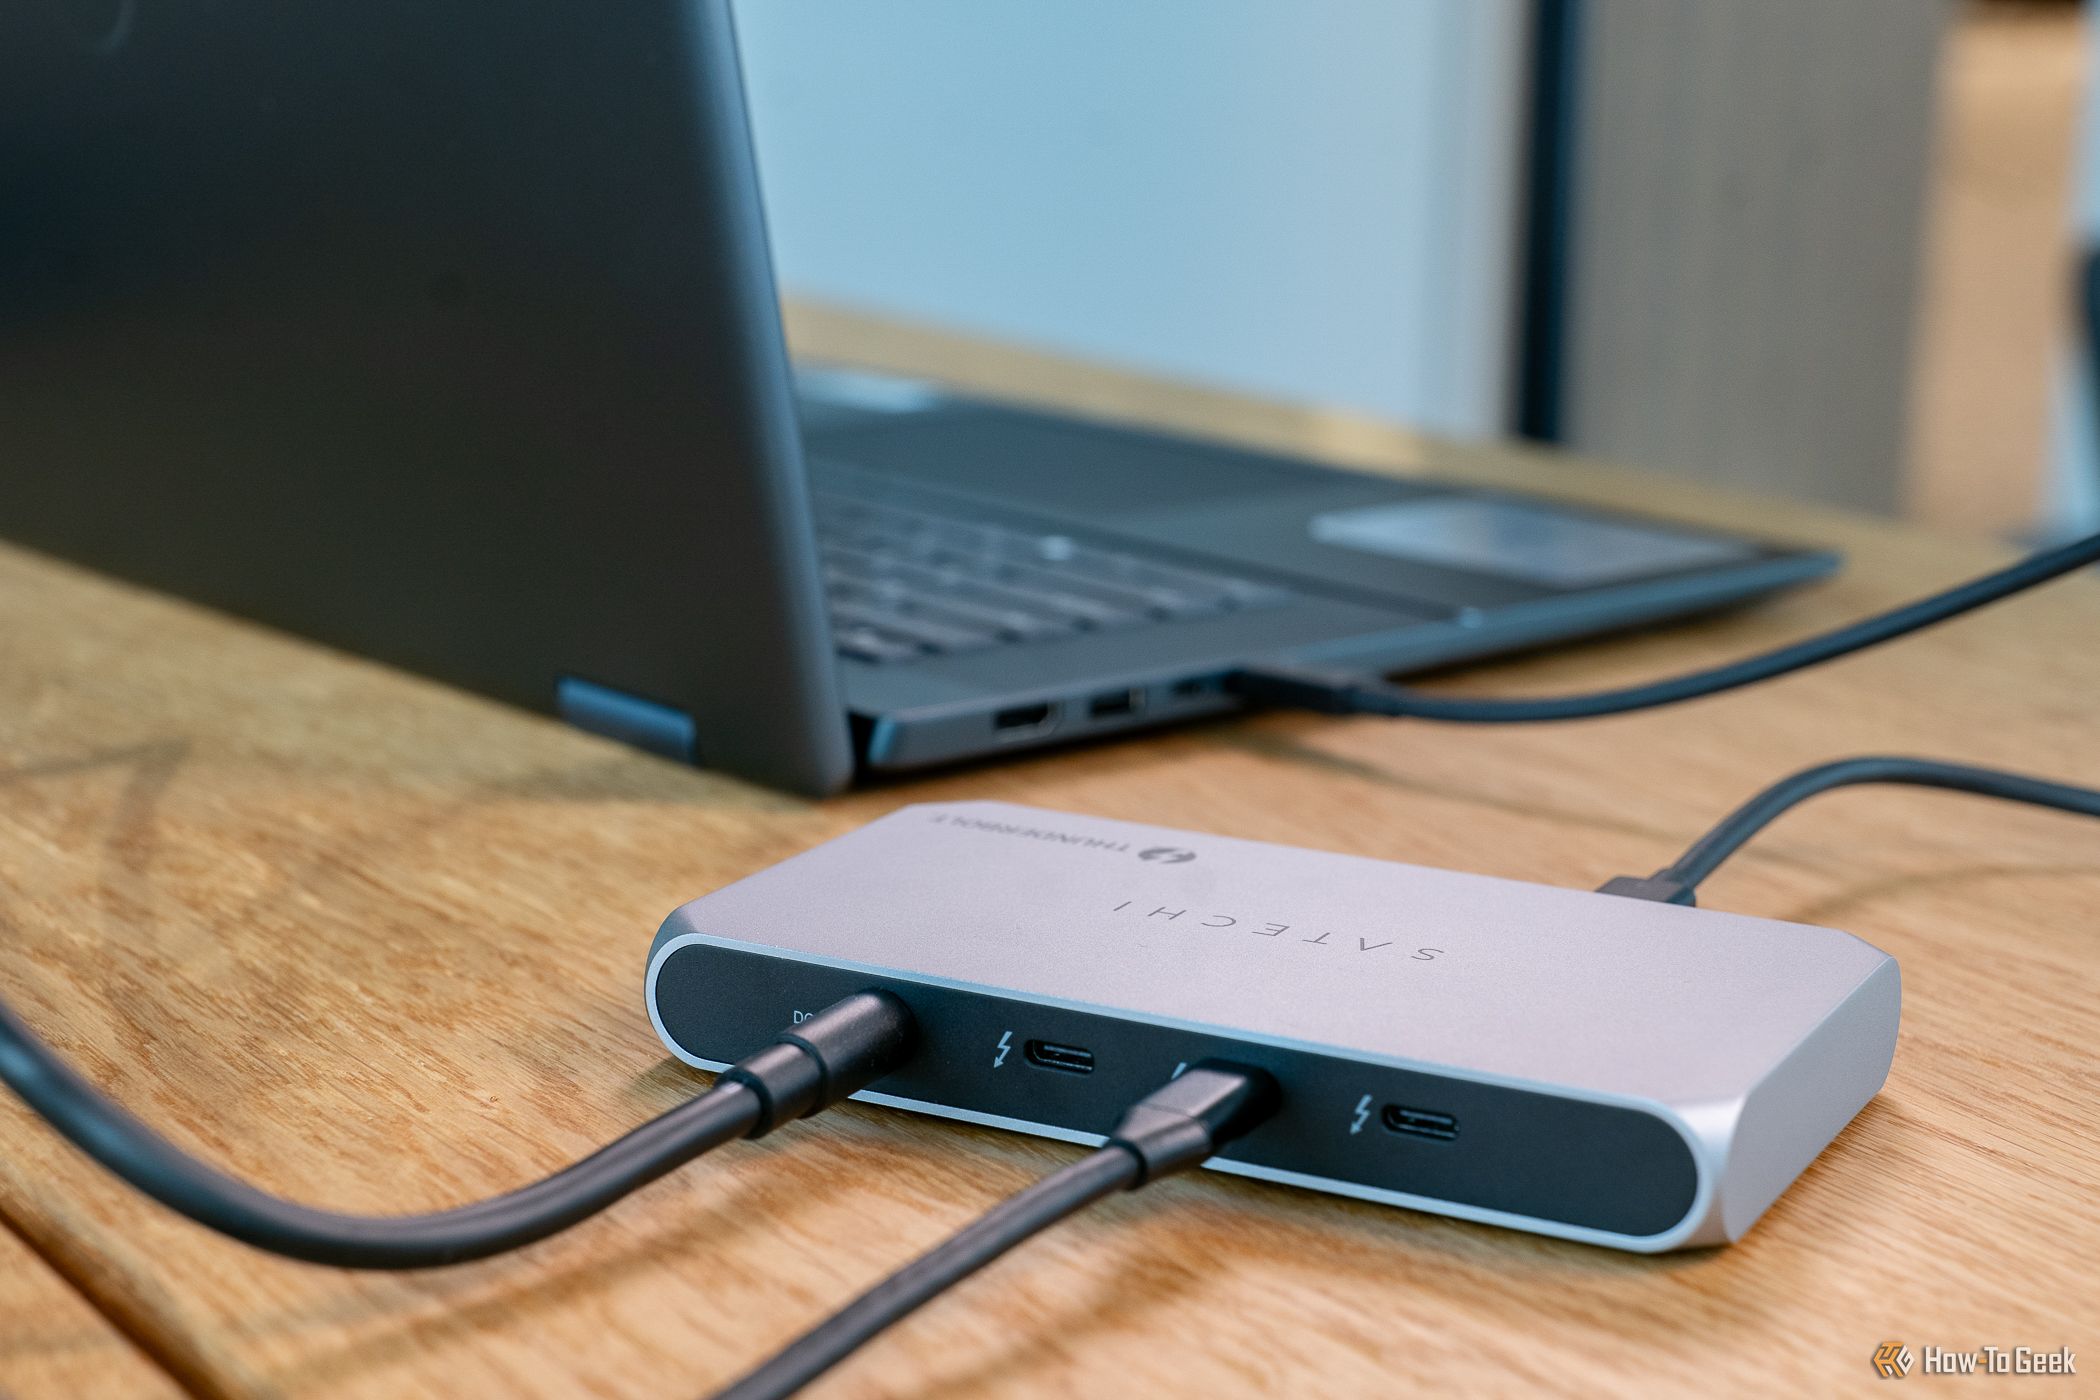 Rear view of the Satechi Thunderbolt 4 Slim Hub Pro connected to a laptop